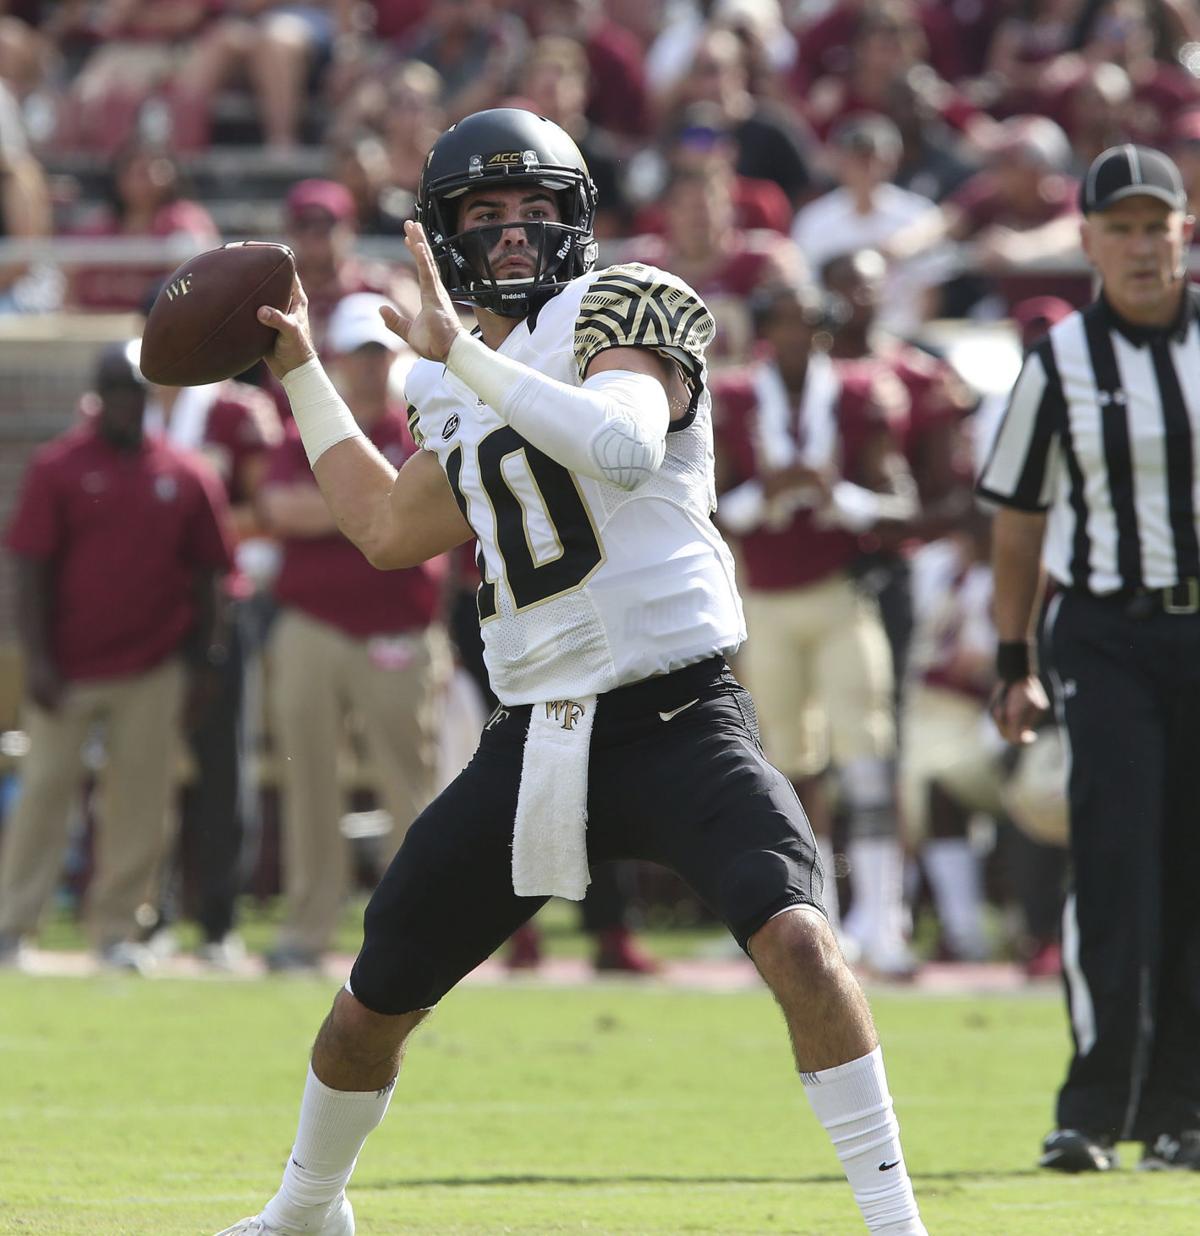 Wake Forest’s rookie quarterback has ties to Reidsville football